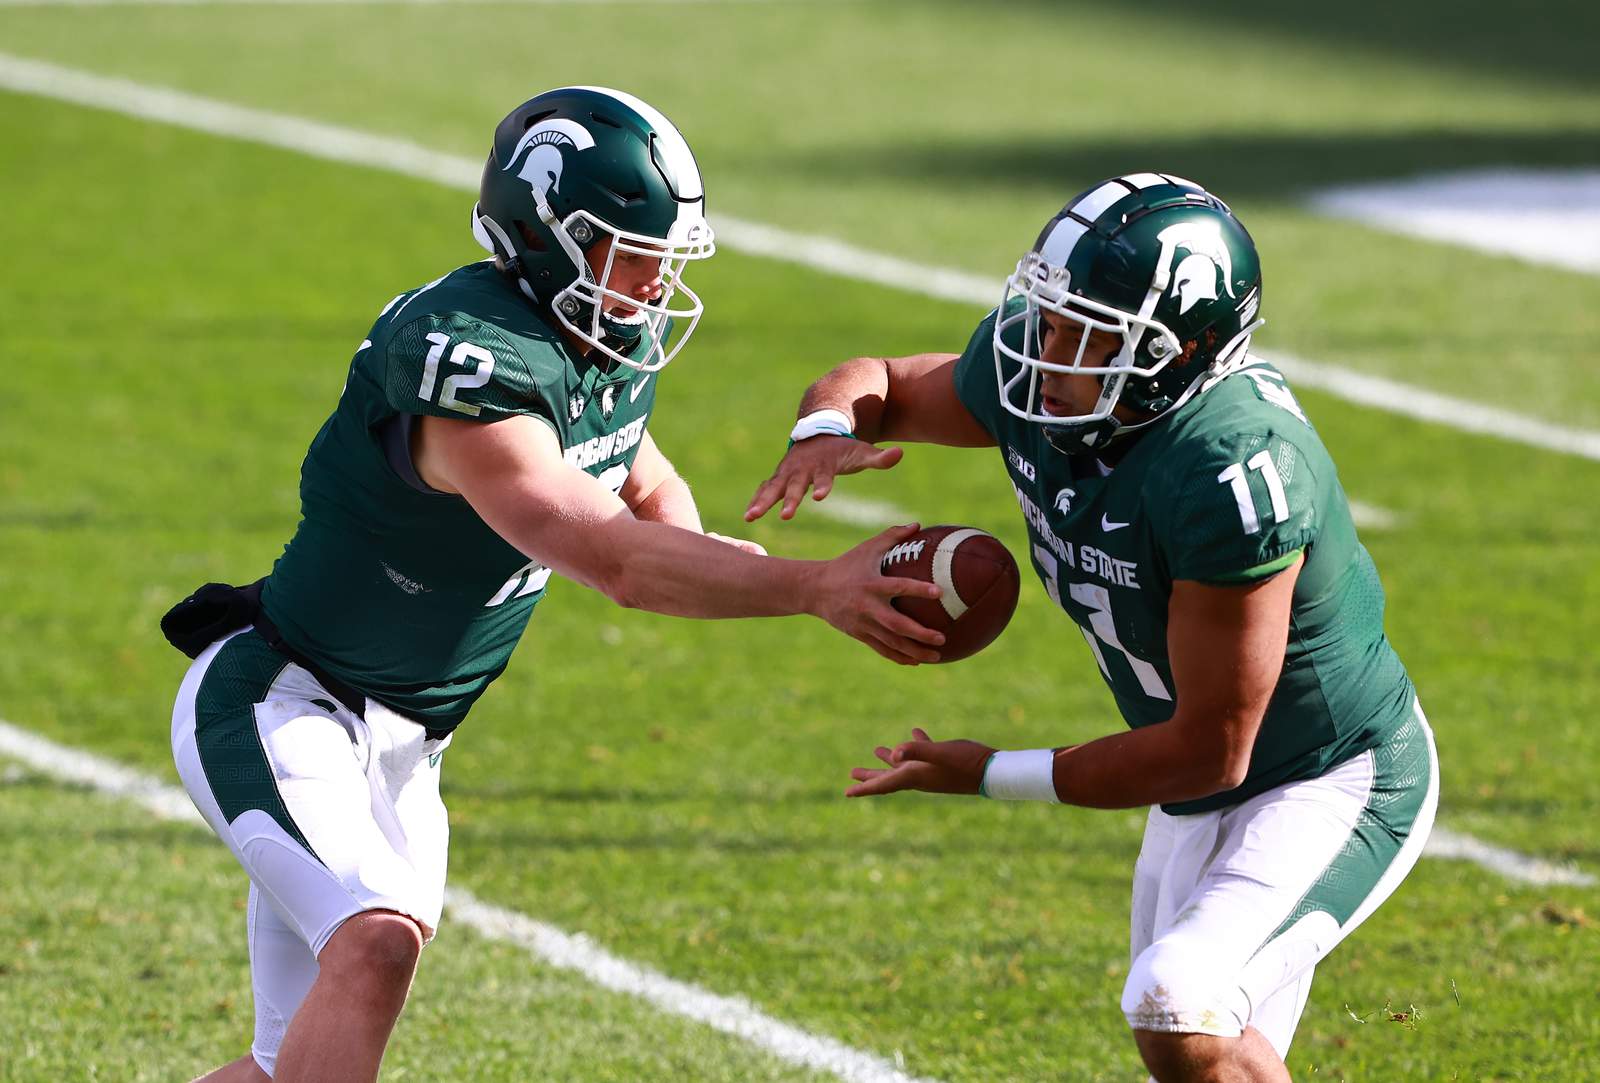 Michigan State football game canceled this weekend due to Maryland’s COVID-19 outbreak